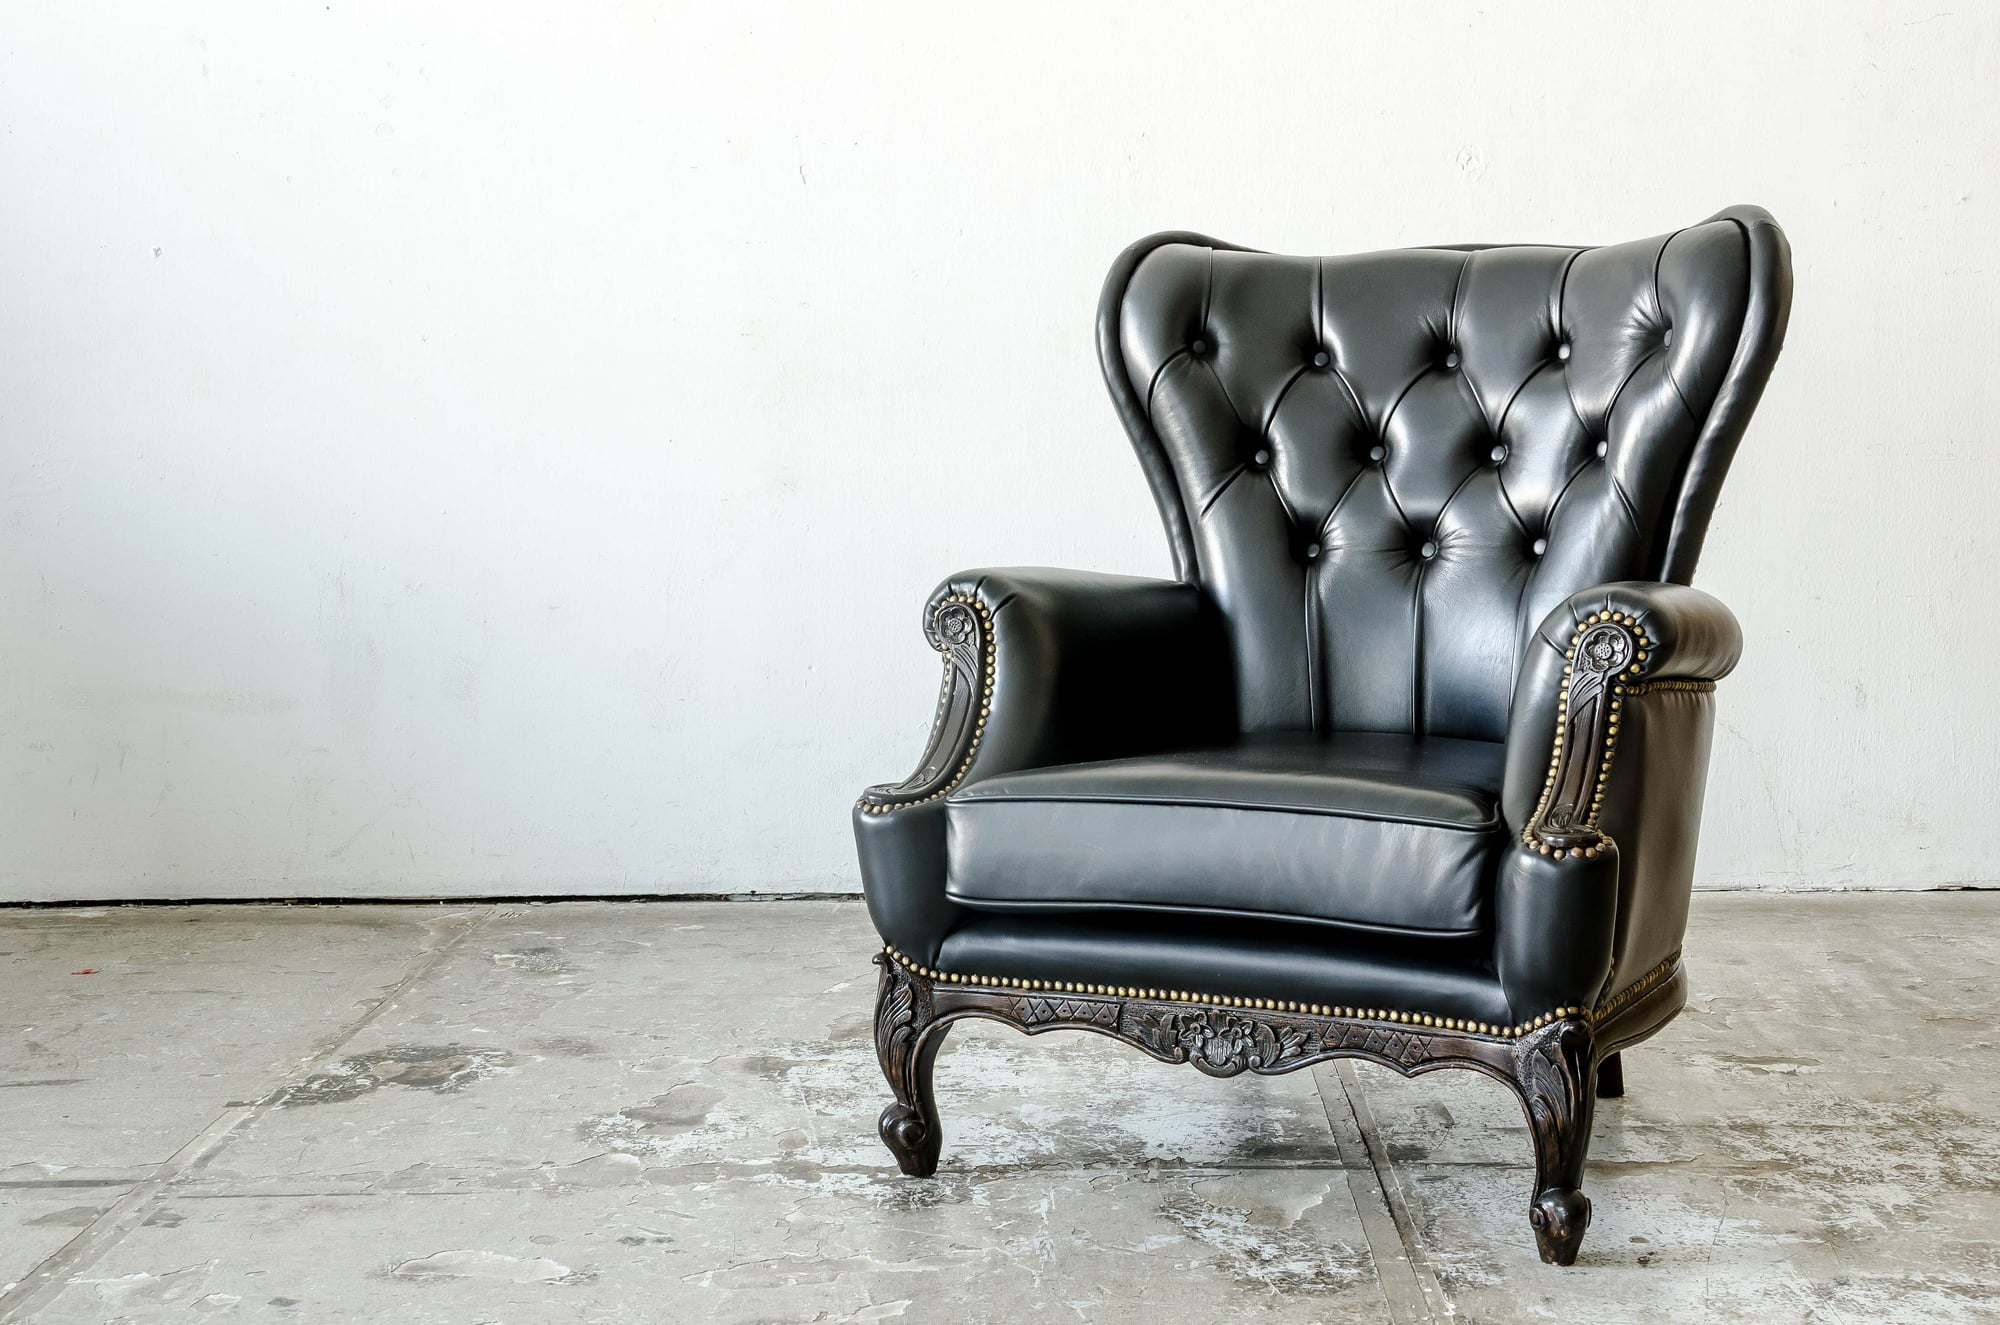 How To Reupholster A Leather Armchair, Leather For Reupholstering Chairs